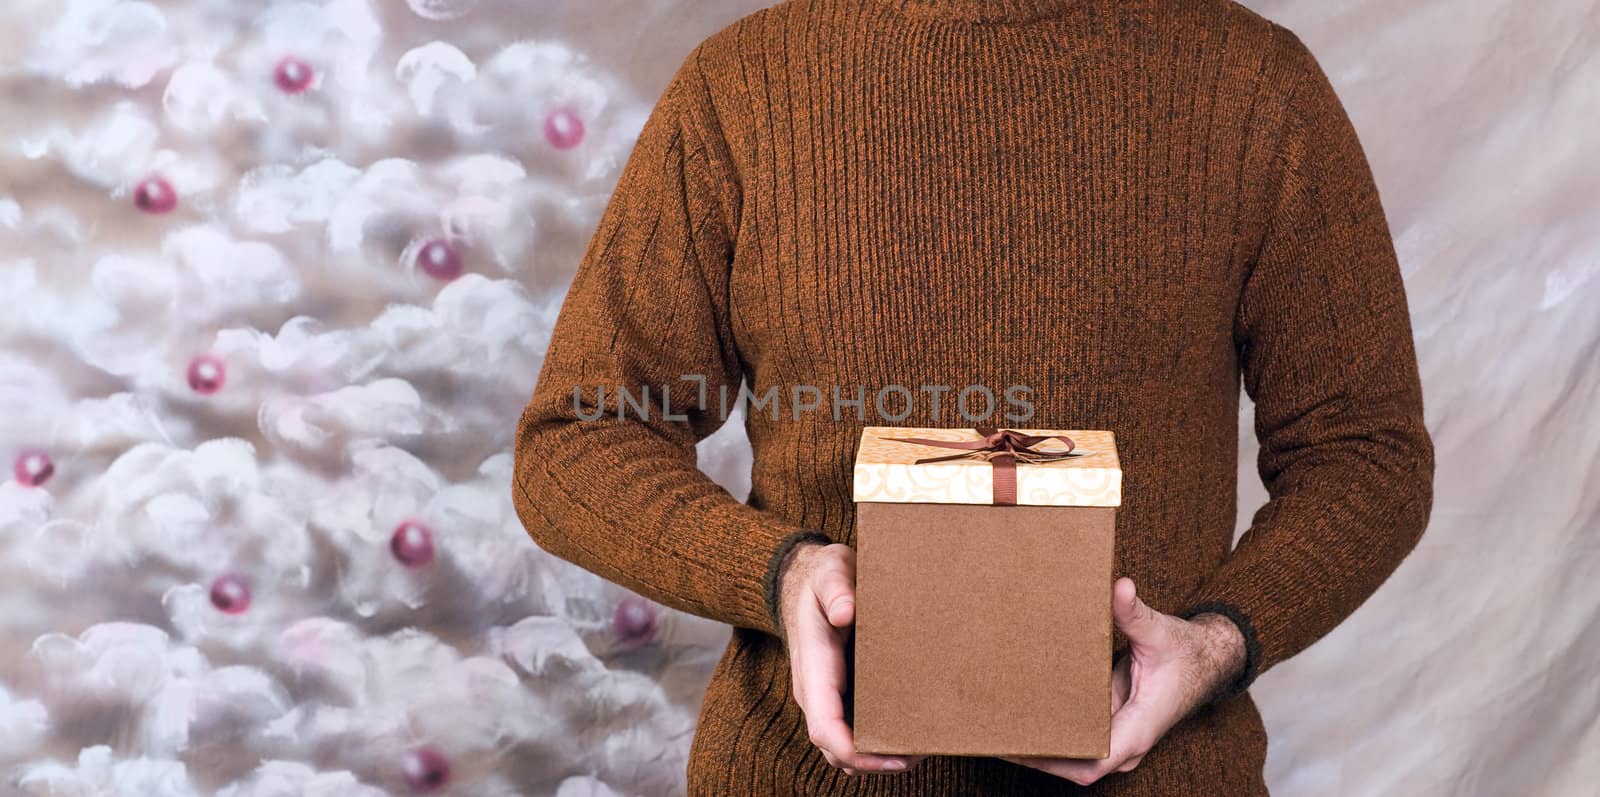 Closeup view of a young man wearing a sweater and holding a holiday gift